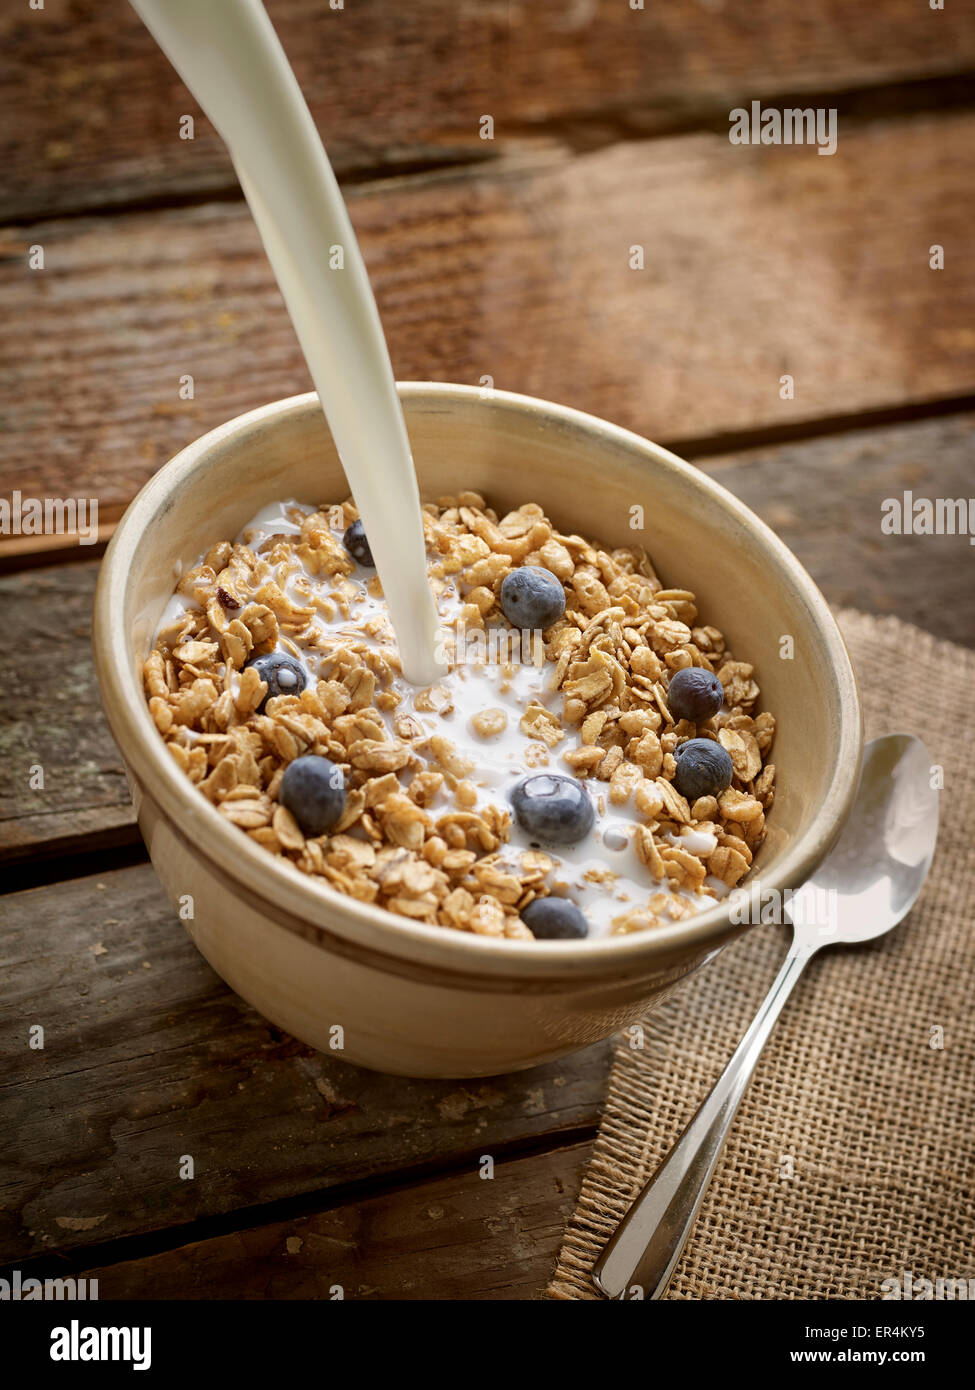 Breakfast Crunchy Cereal Poured in Bowl with Milk or Yogurt in